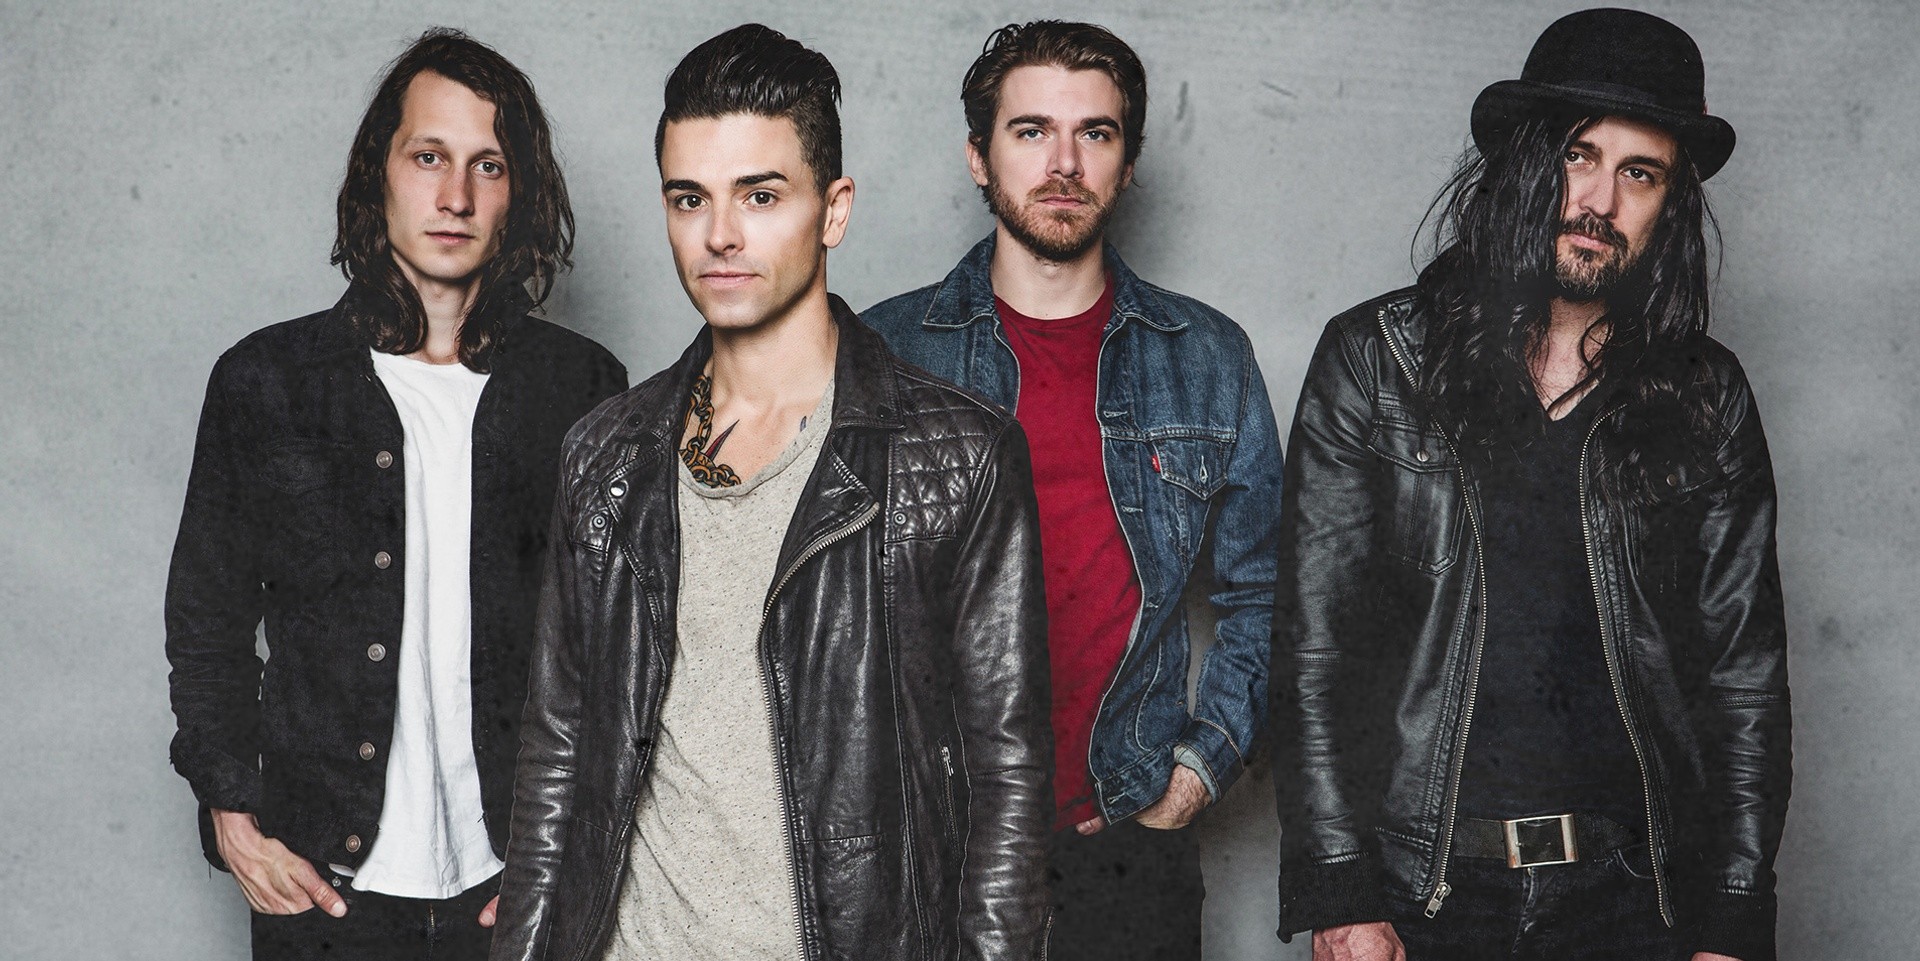 Dashboard Confessional evaluate their discography (and career) thus far